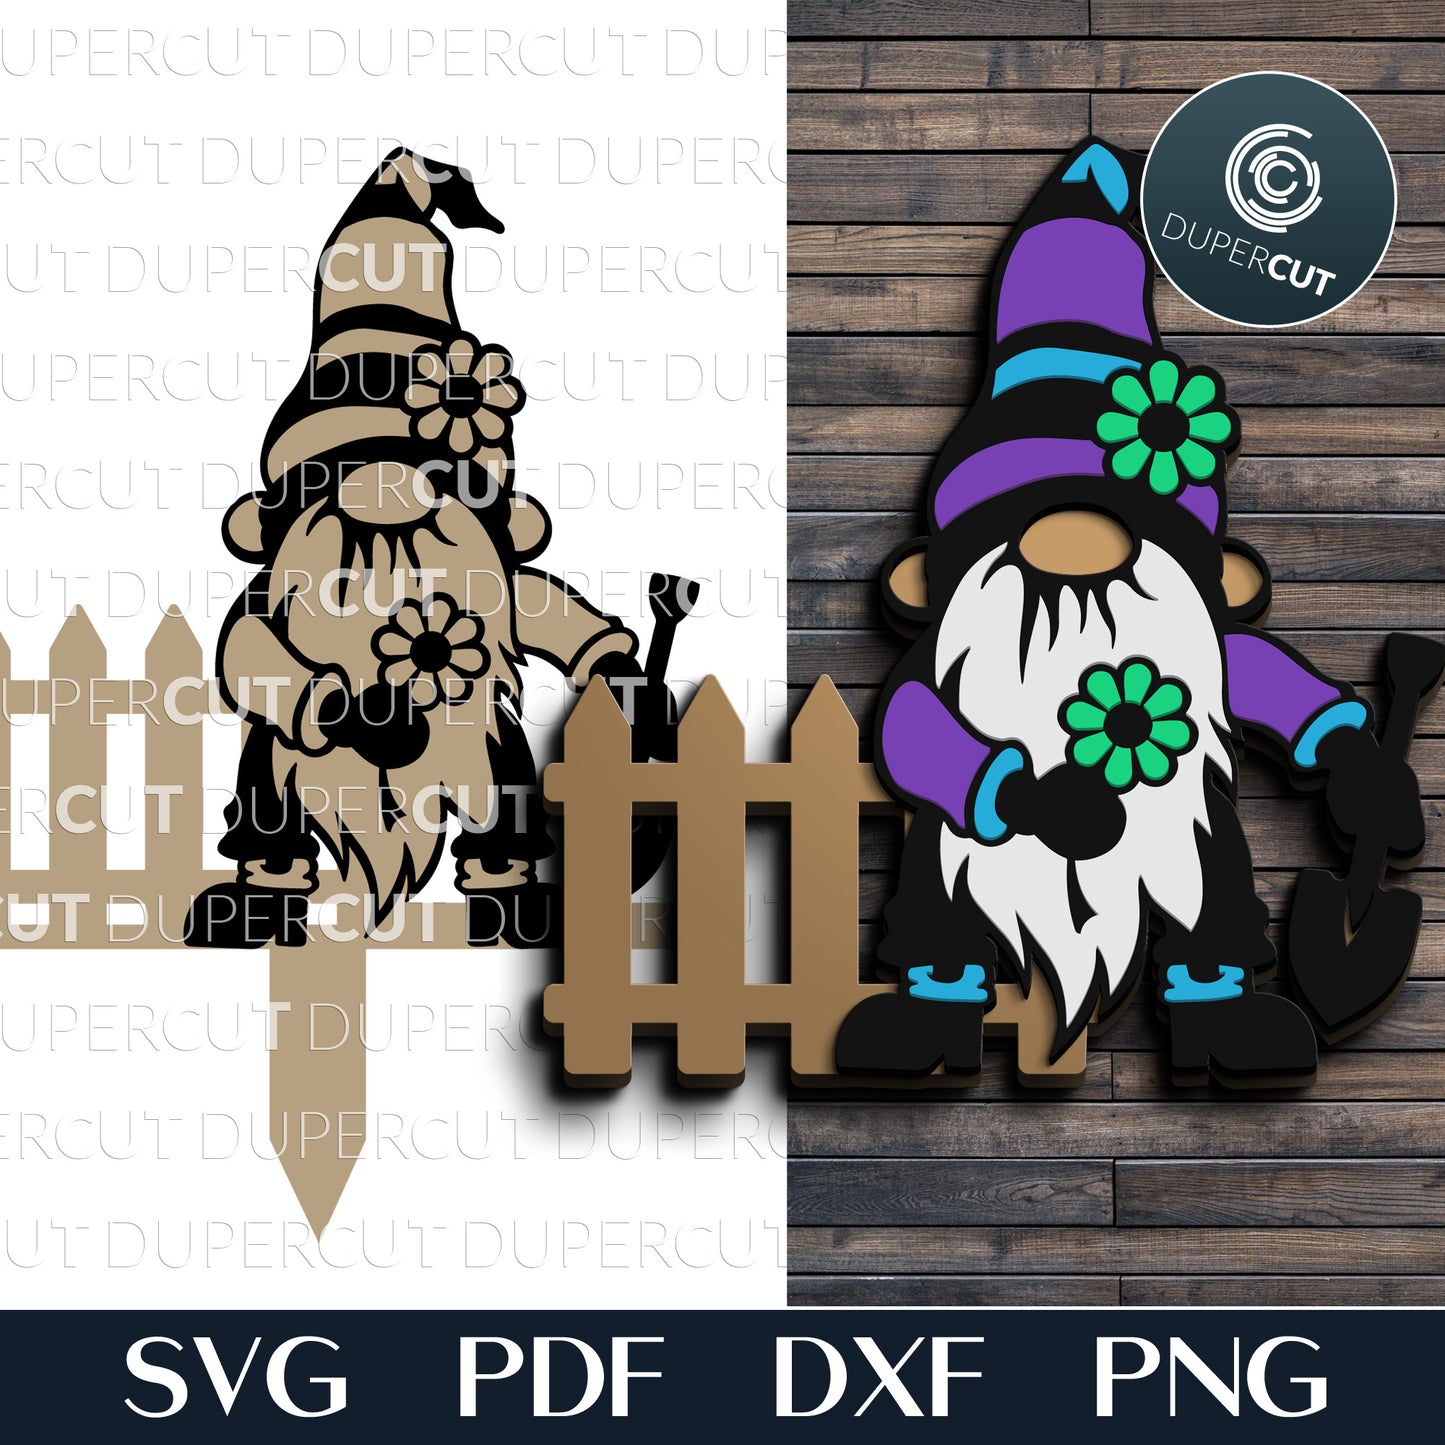 Garden gnome with flower - SVG DXF layered cutting files for Glowforge, Cricut, Silhouette cameo, CNC pattern by DuperCut.com